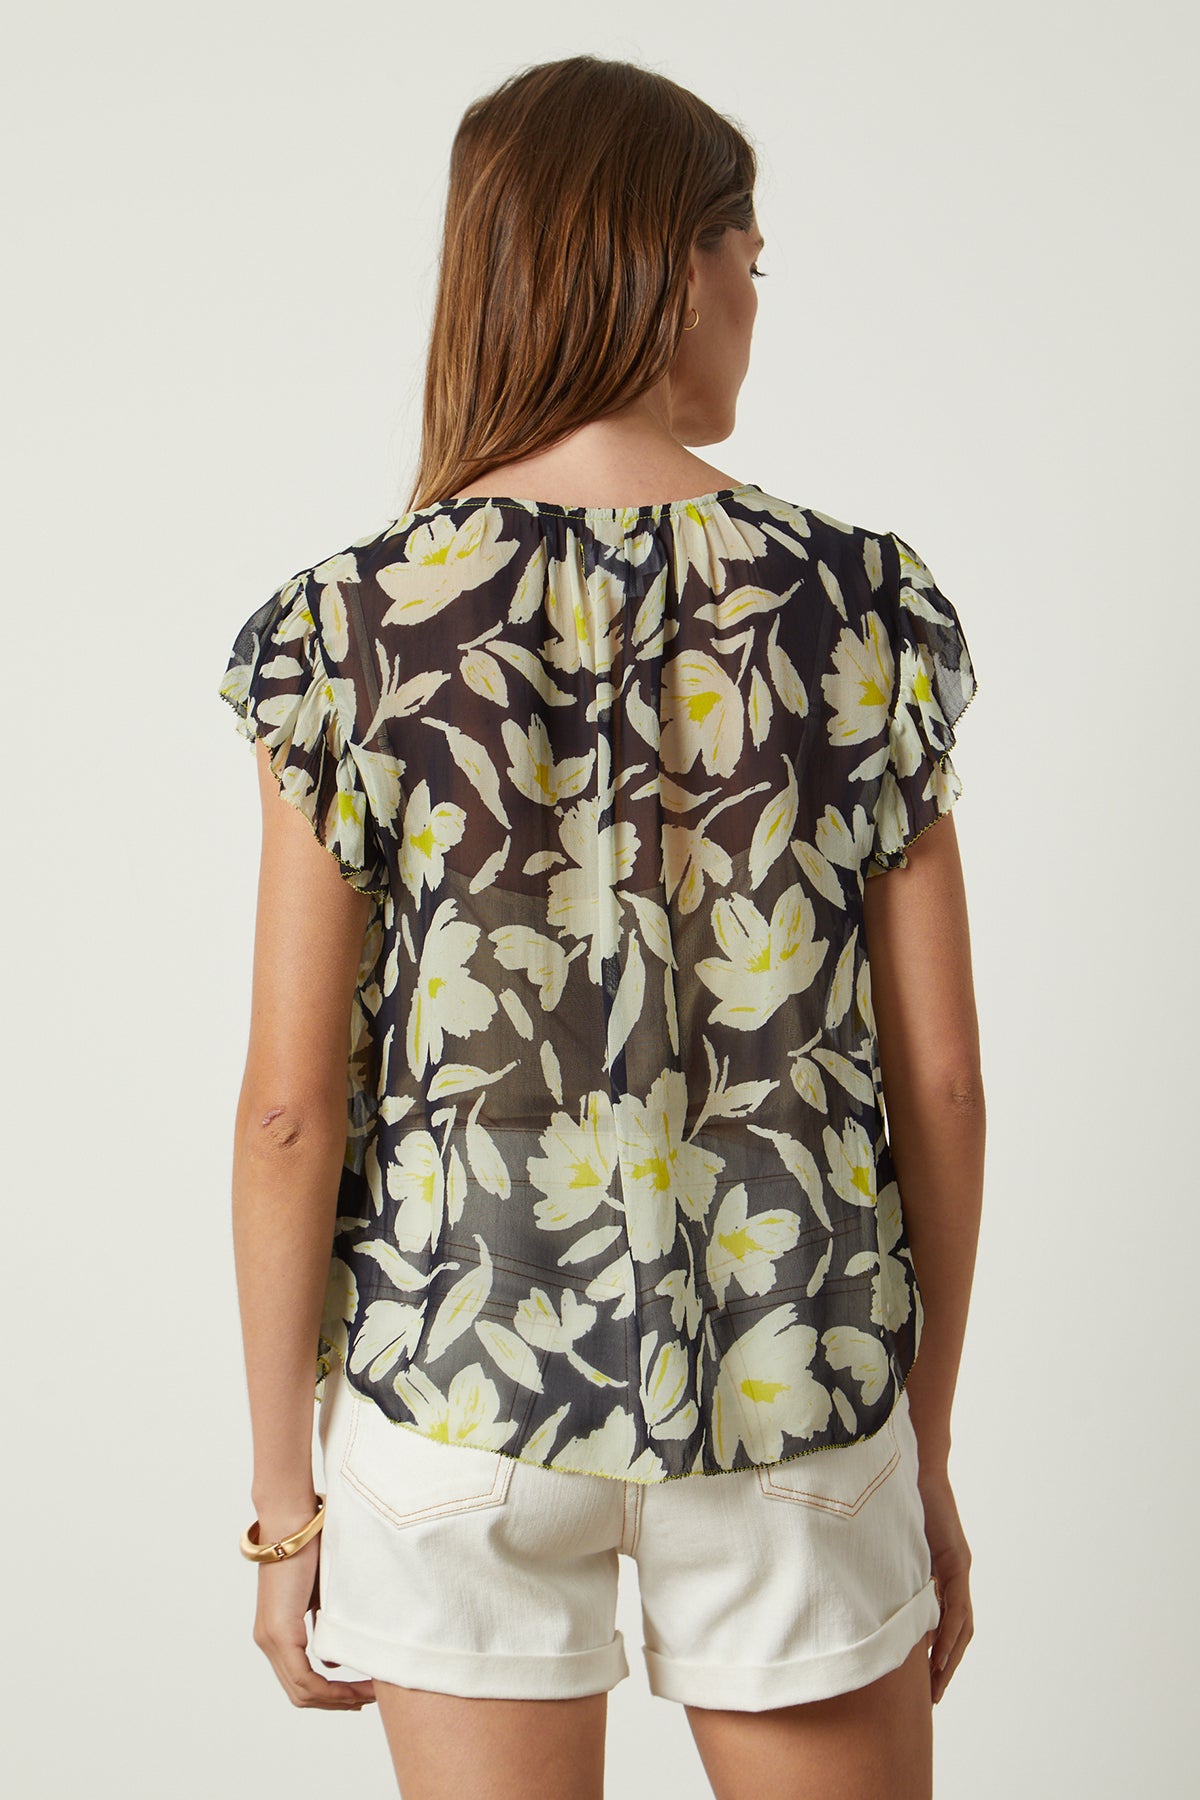 the back view of a woman wearing the Velvet by Graham & Spencer LUCIA PRINTED TOP with floral print.-26143082807489